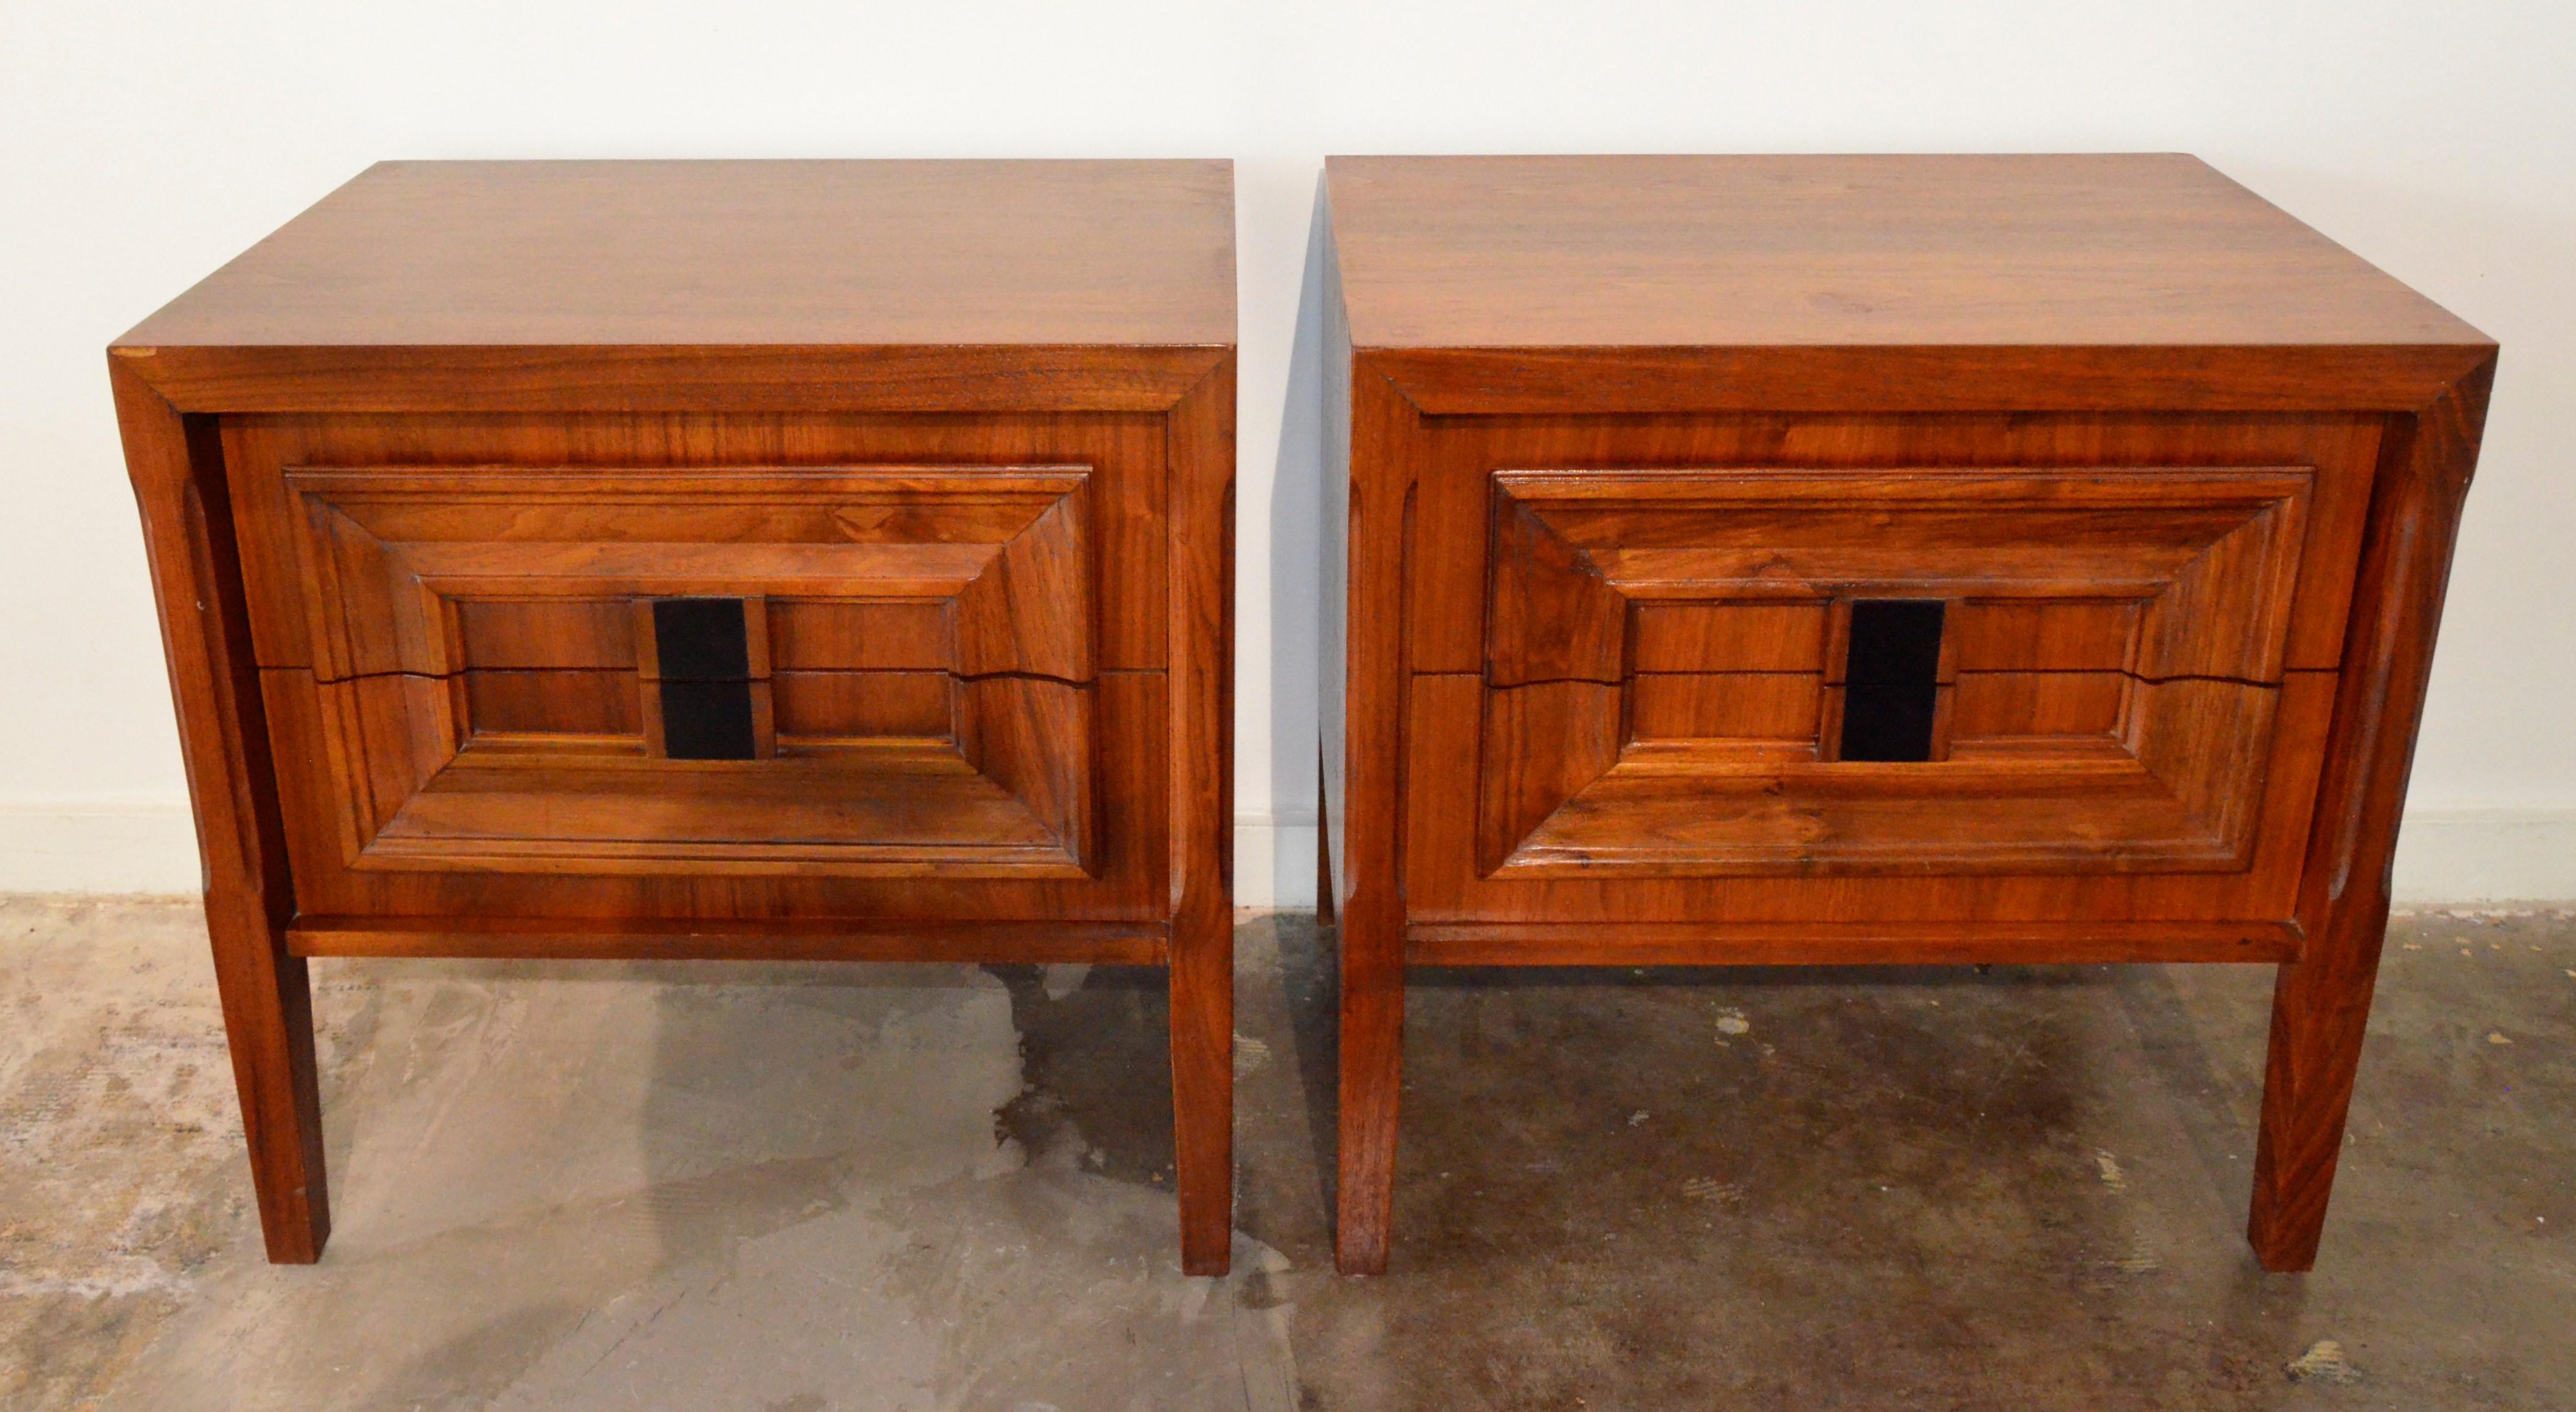 Pair Mid-Century Modern Walnut Veneer and Burl Wood Bedside Nightstands /Tables In Good Condition For Sale In Houston, TX